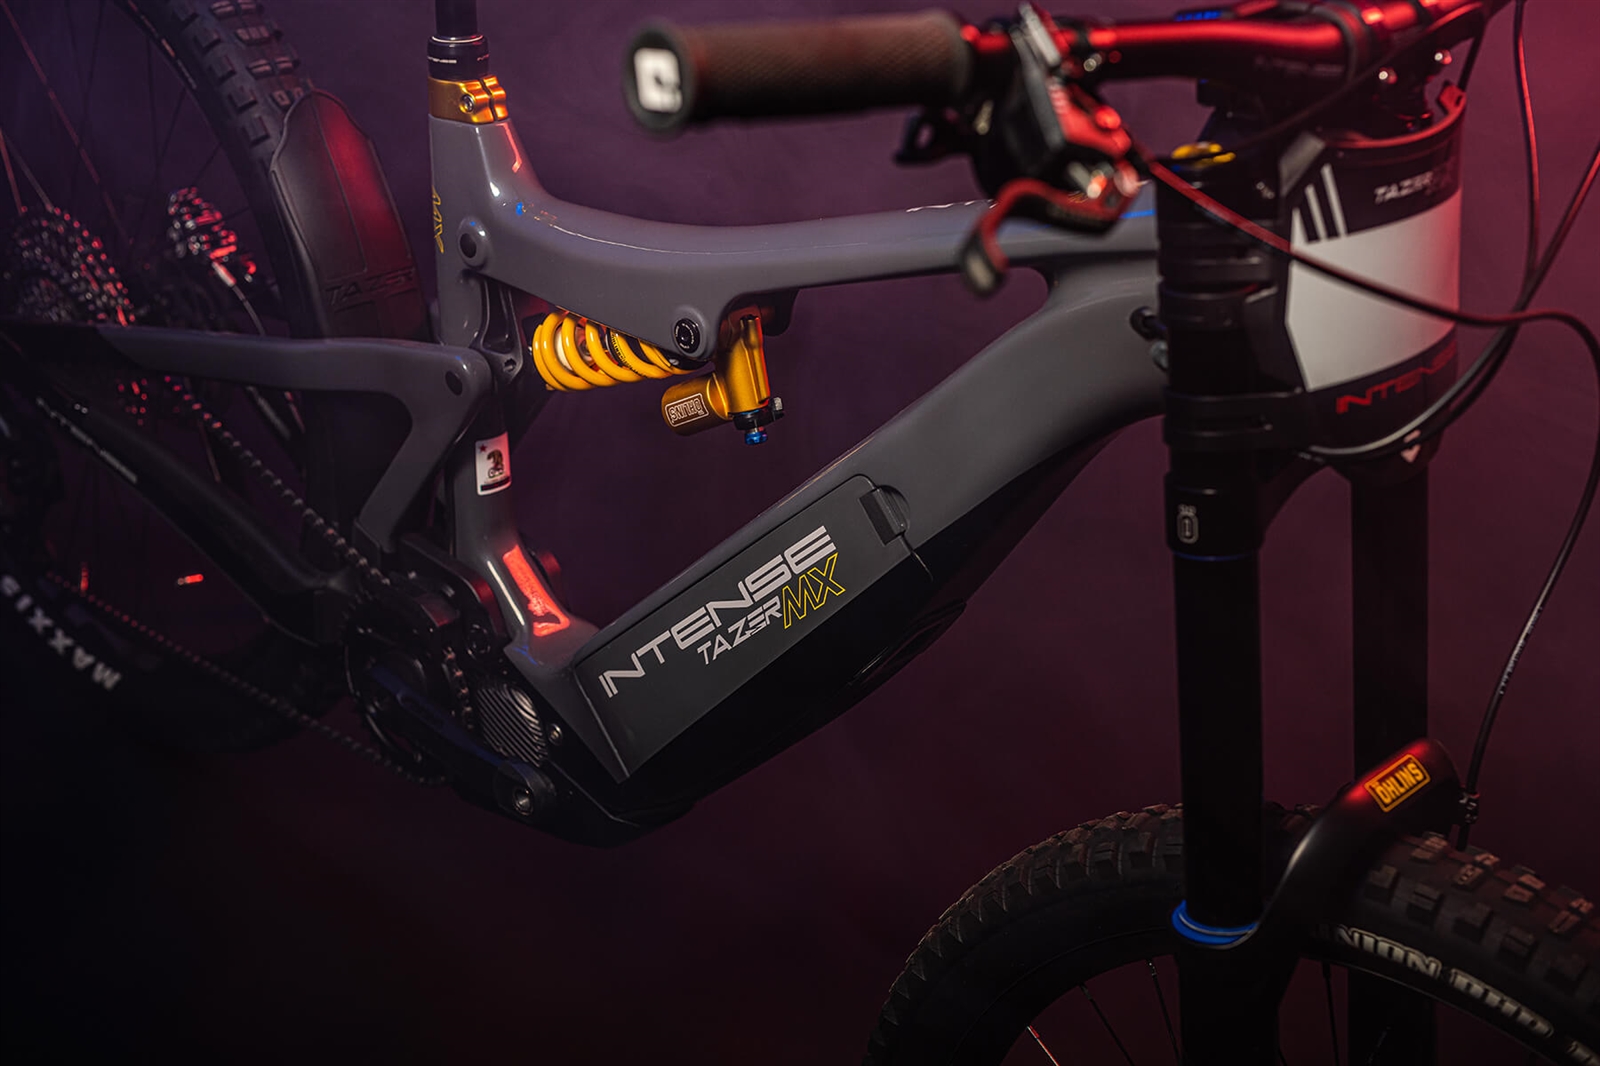 INTENSE e-bikes are available on Ridewill